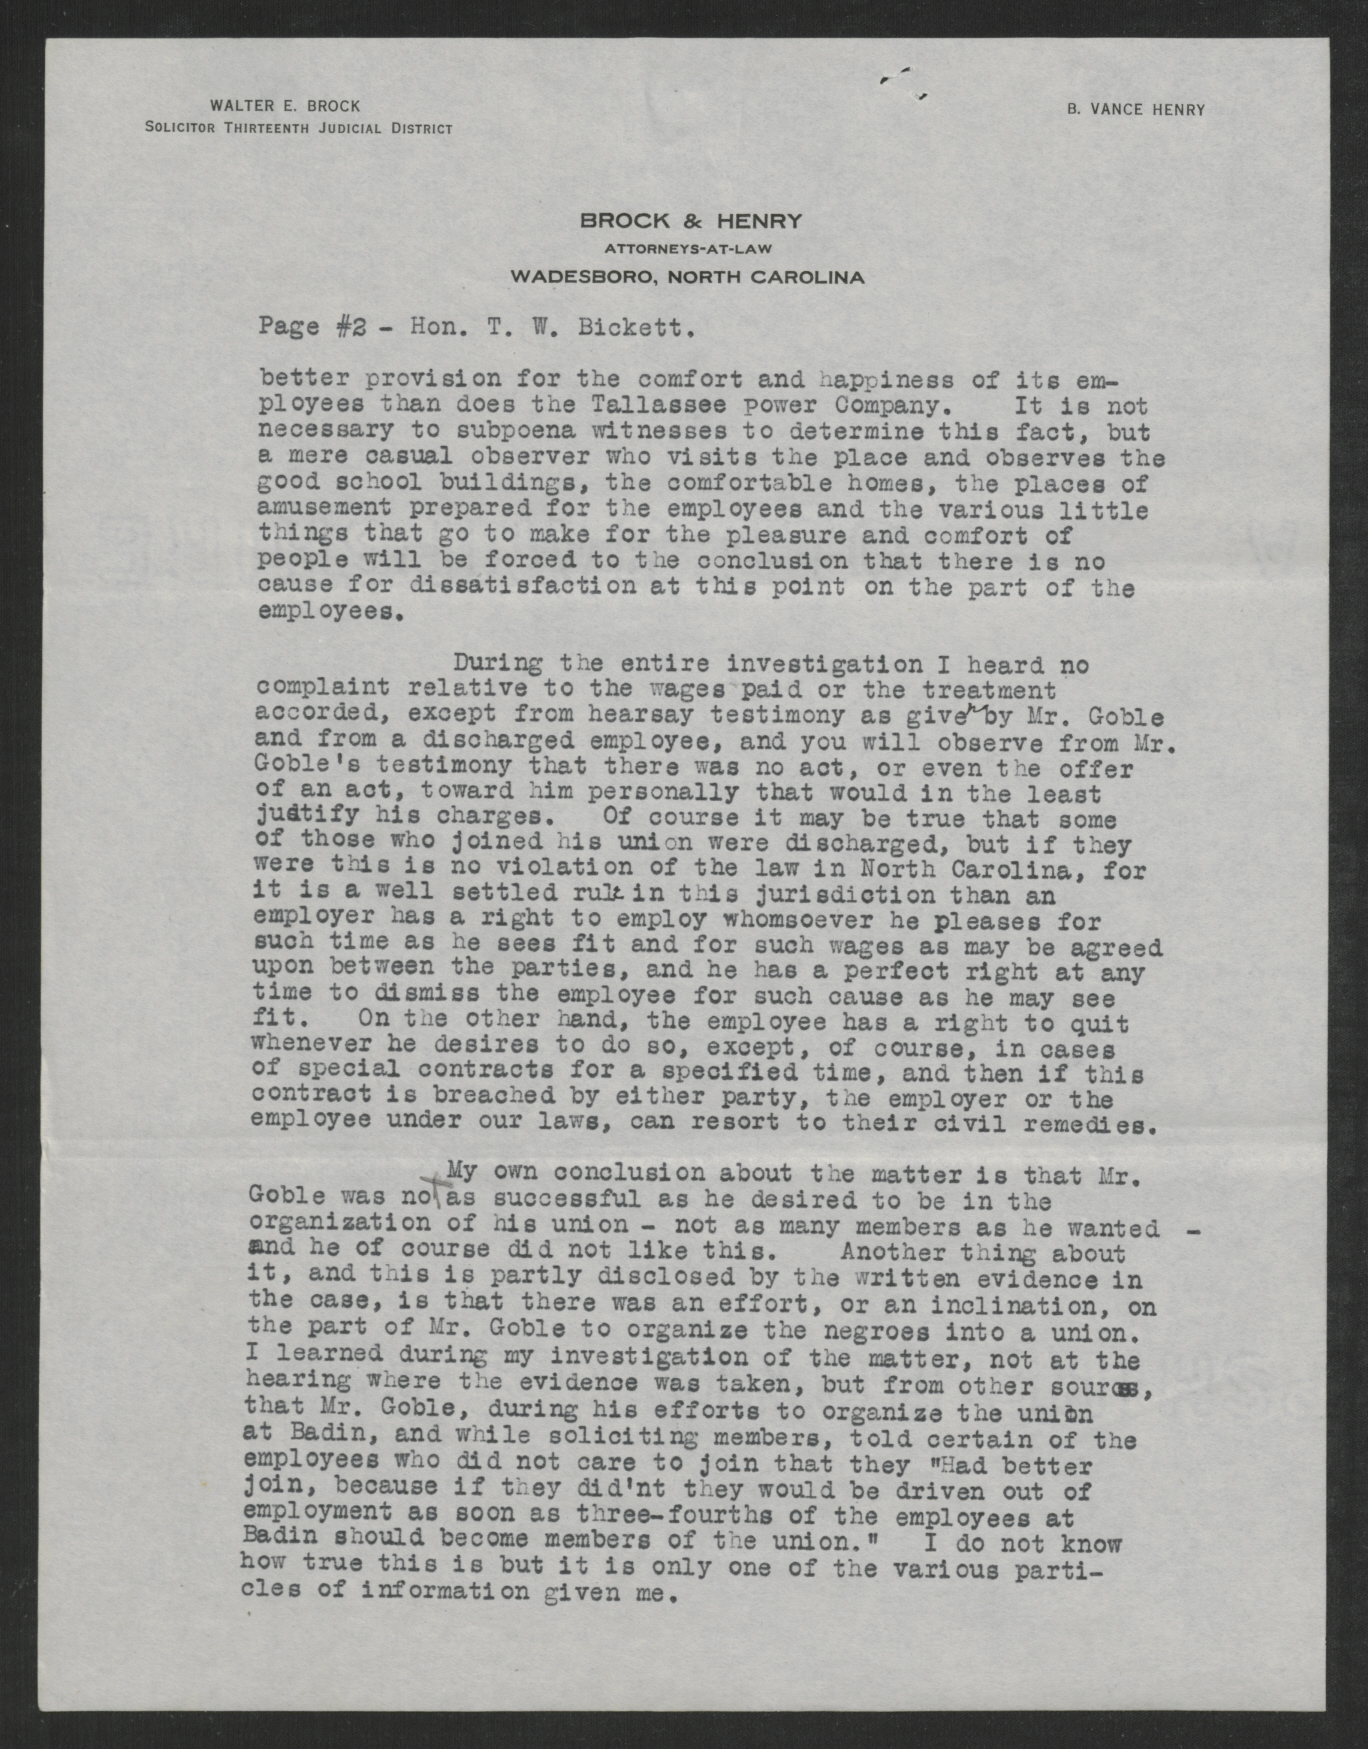 Letter from Walter E. Brock to Thomas W. Bickett, July 17, 1919, page 2